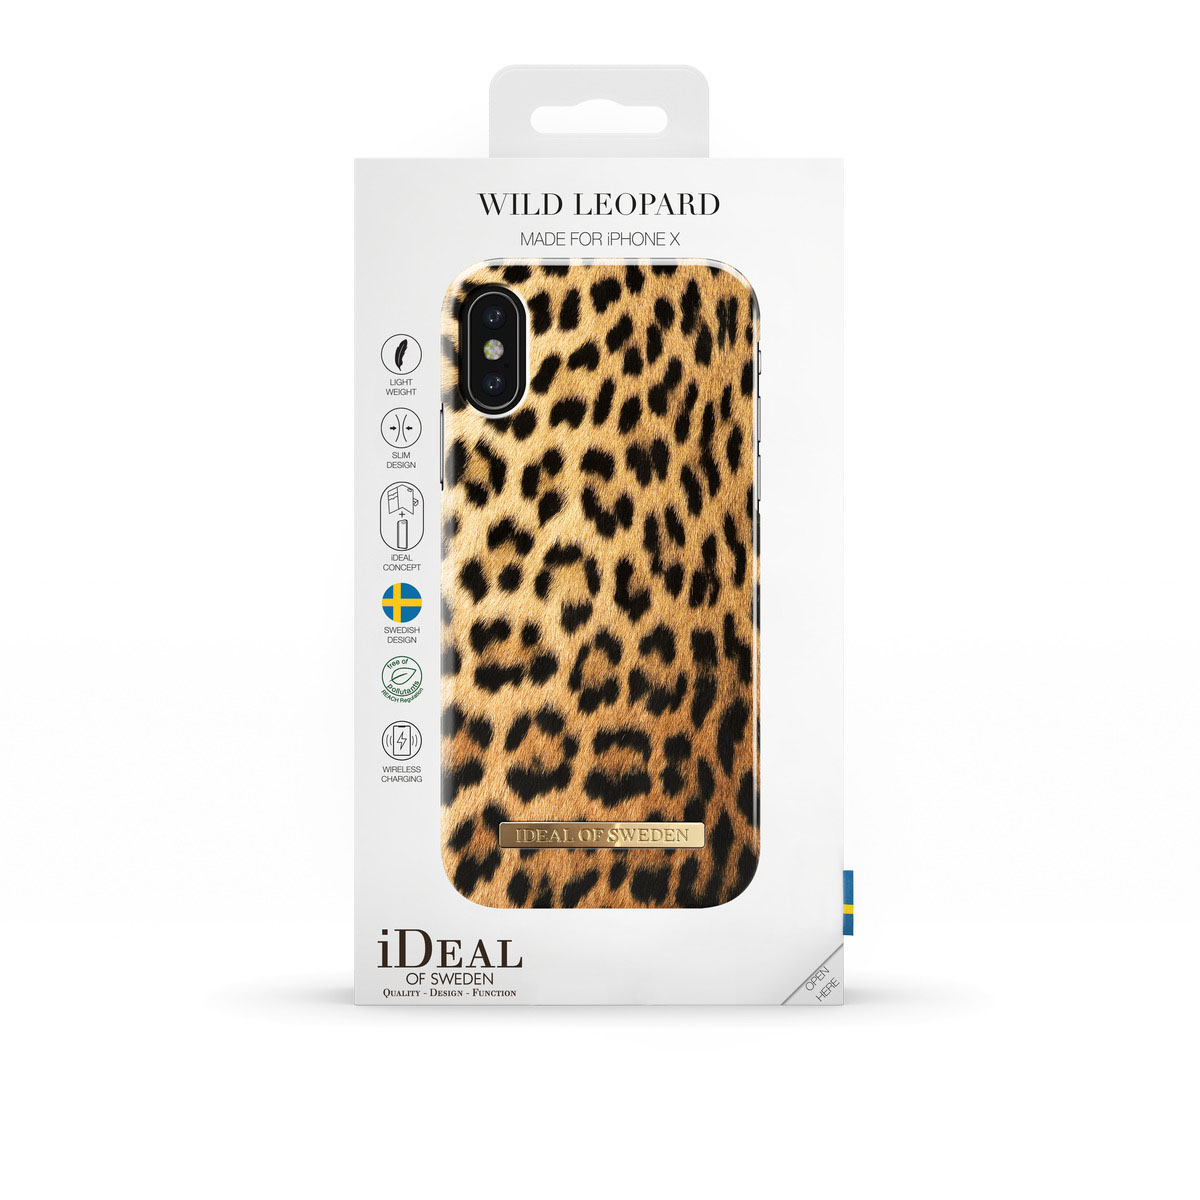 X, IDEAL iPhone Fashion, Leopard Apple, SWEDEN Wild OF Backcover,